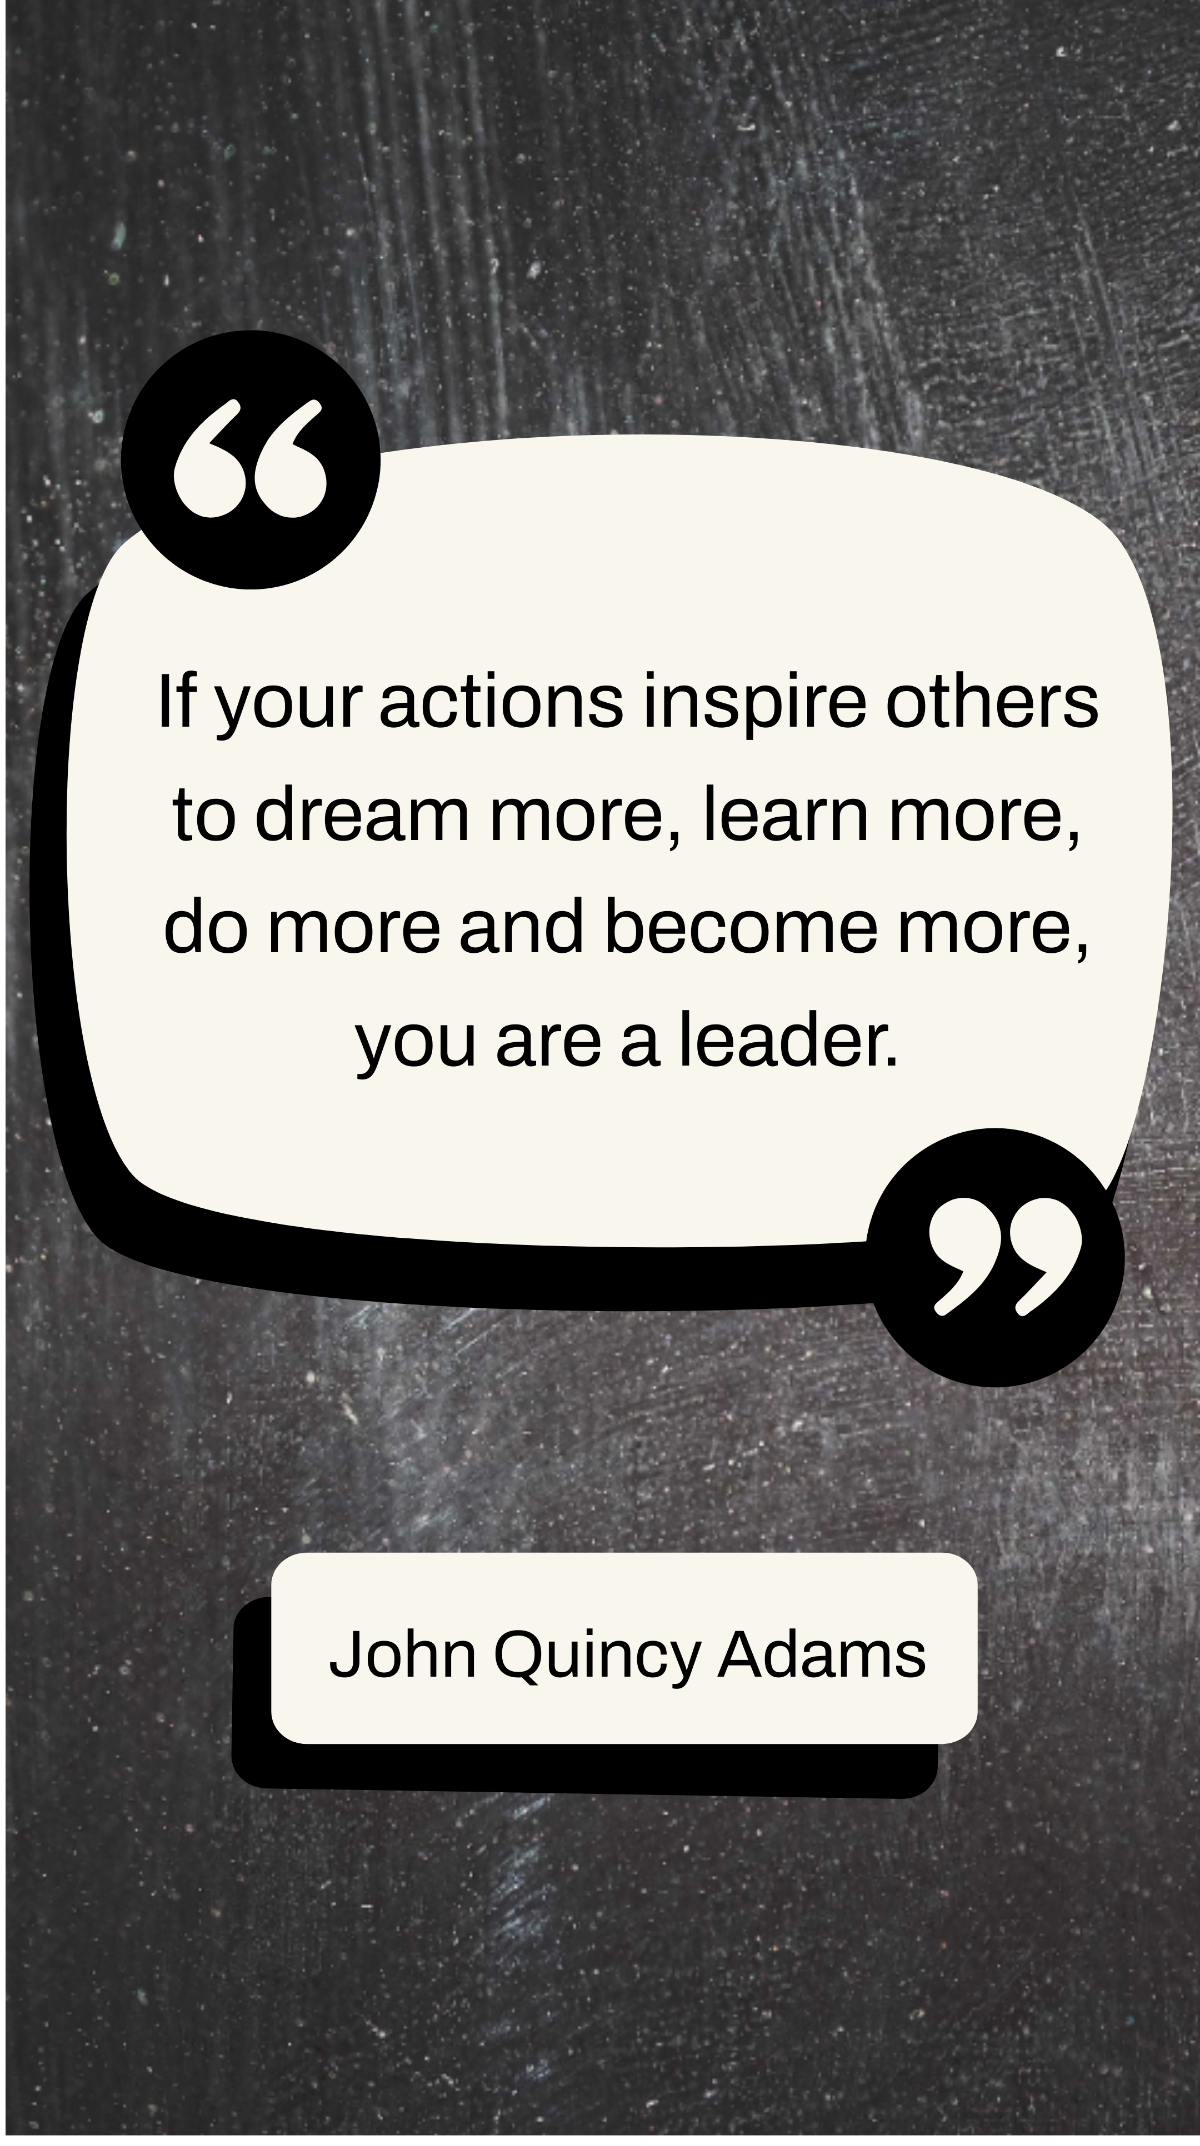 John Quincy Adams - “If your actions inspire others to dream more, learn more, do more and become more, you are a leader.” Template